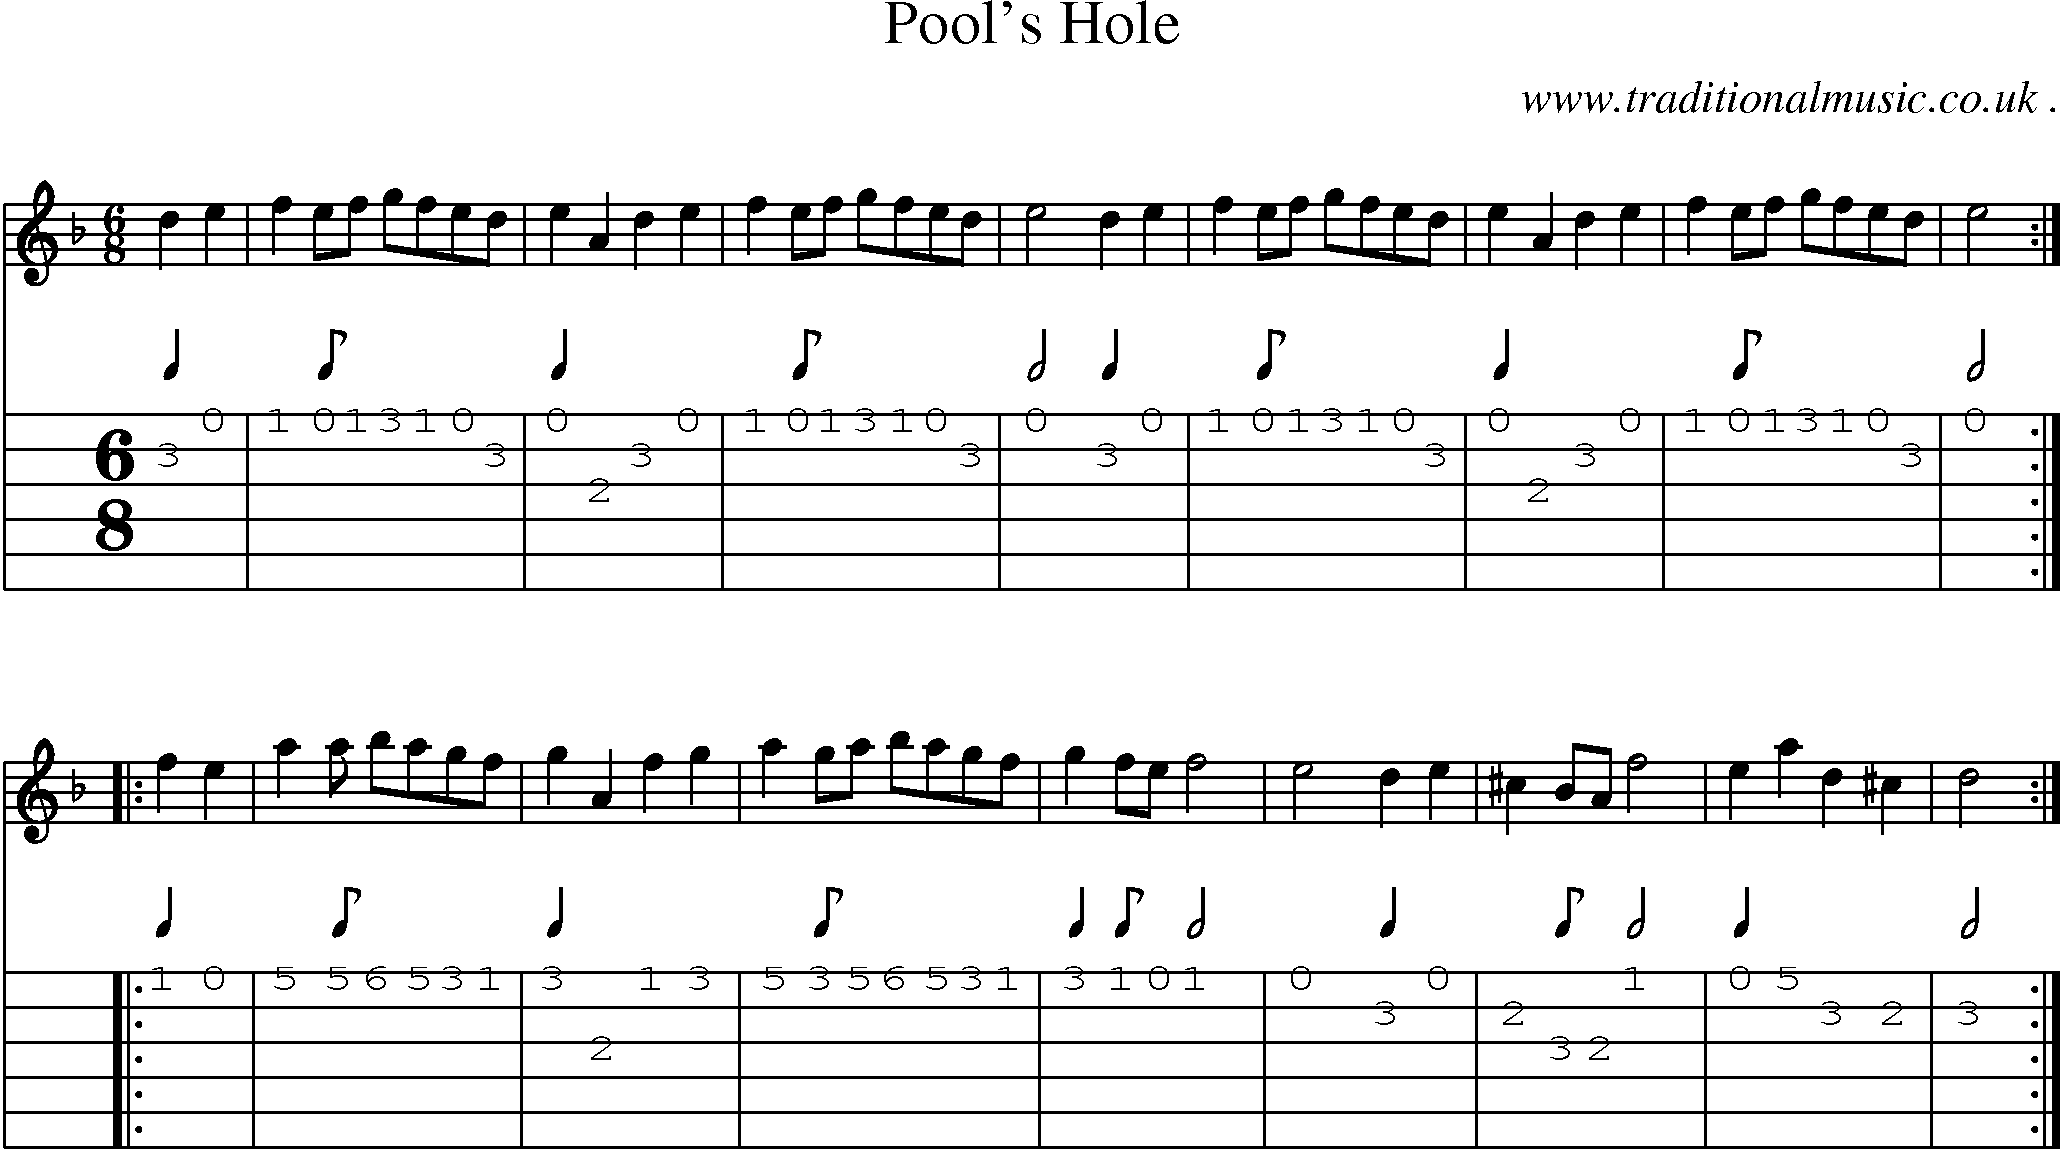 Sheet-Music and Guitar Tabs for Pools Hole